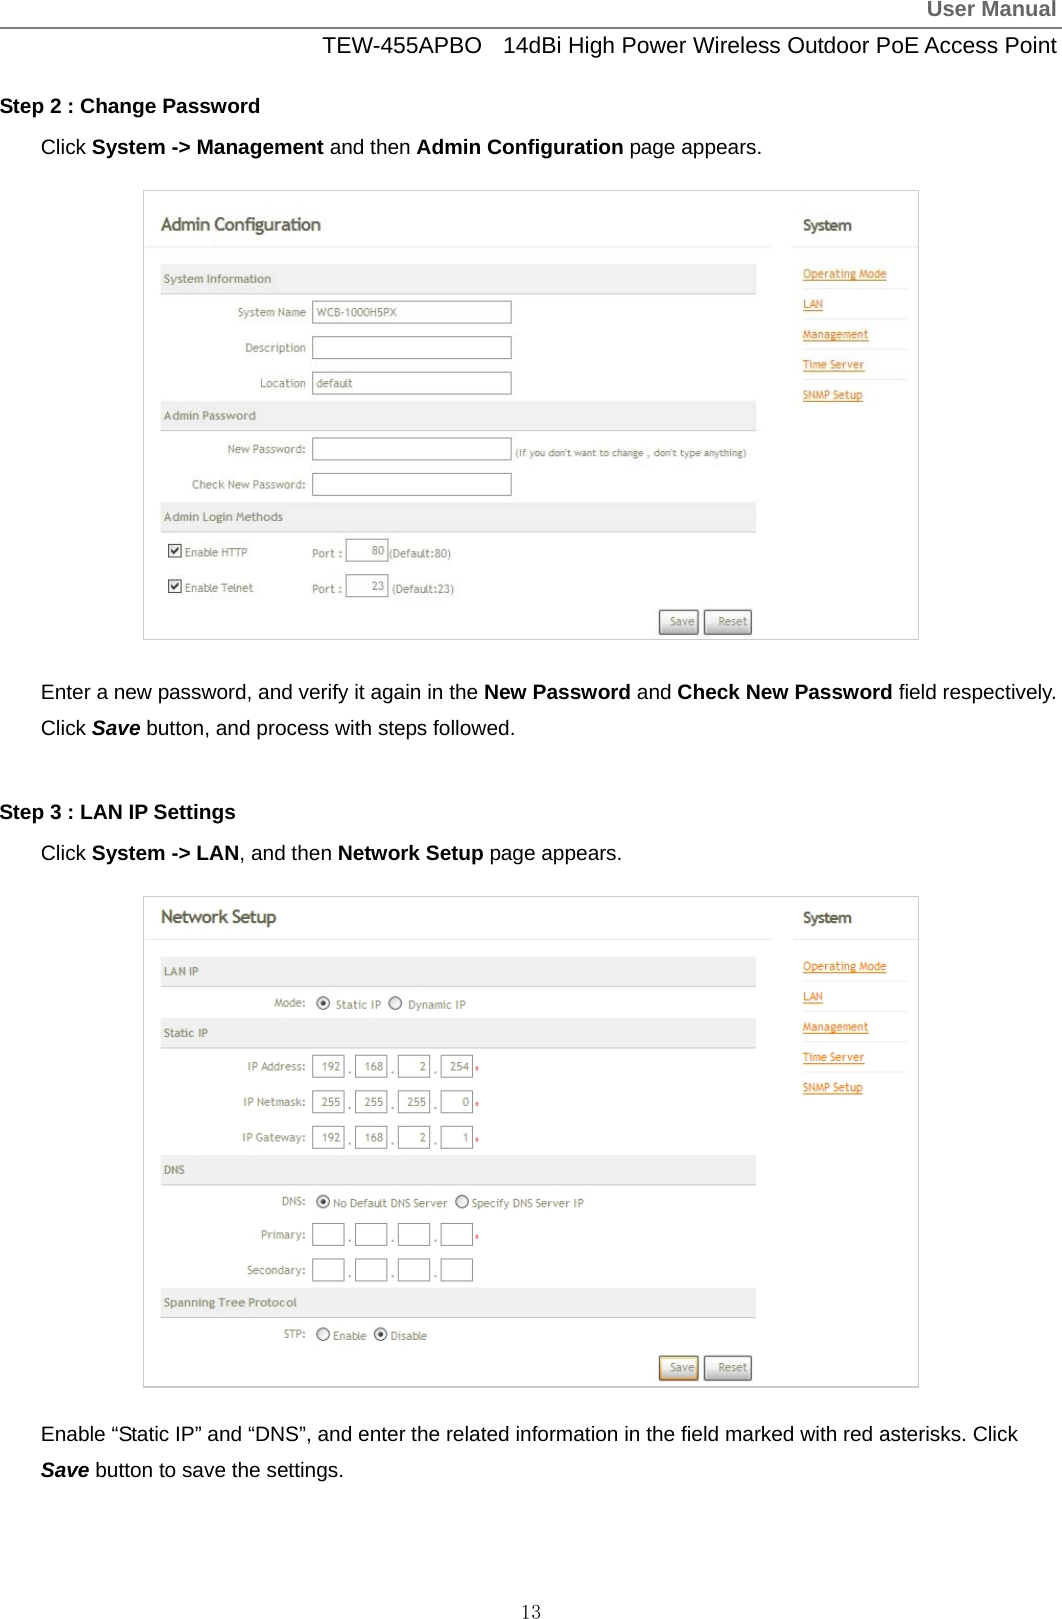 User ManualTEW-455APBO  14dBi High Power Wireless Outdoor PoE Access Point 13 Step 2 : Change Password Click System -&gt; Management and then Admin Configuration page appears.             Enter a new password, and verify it again in the New Password and Check New Password field respectively. Click Save button, and process with steps followed.  Step 3 : LAN IP Settings Click System -&gt; LAN, and then Network Setup page appears.              Enable “Static IP” and “DNS”, and enter the related information in the field marked with red asterisks. Click Save button to save the settings. 